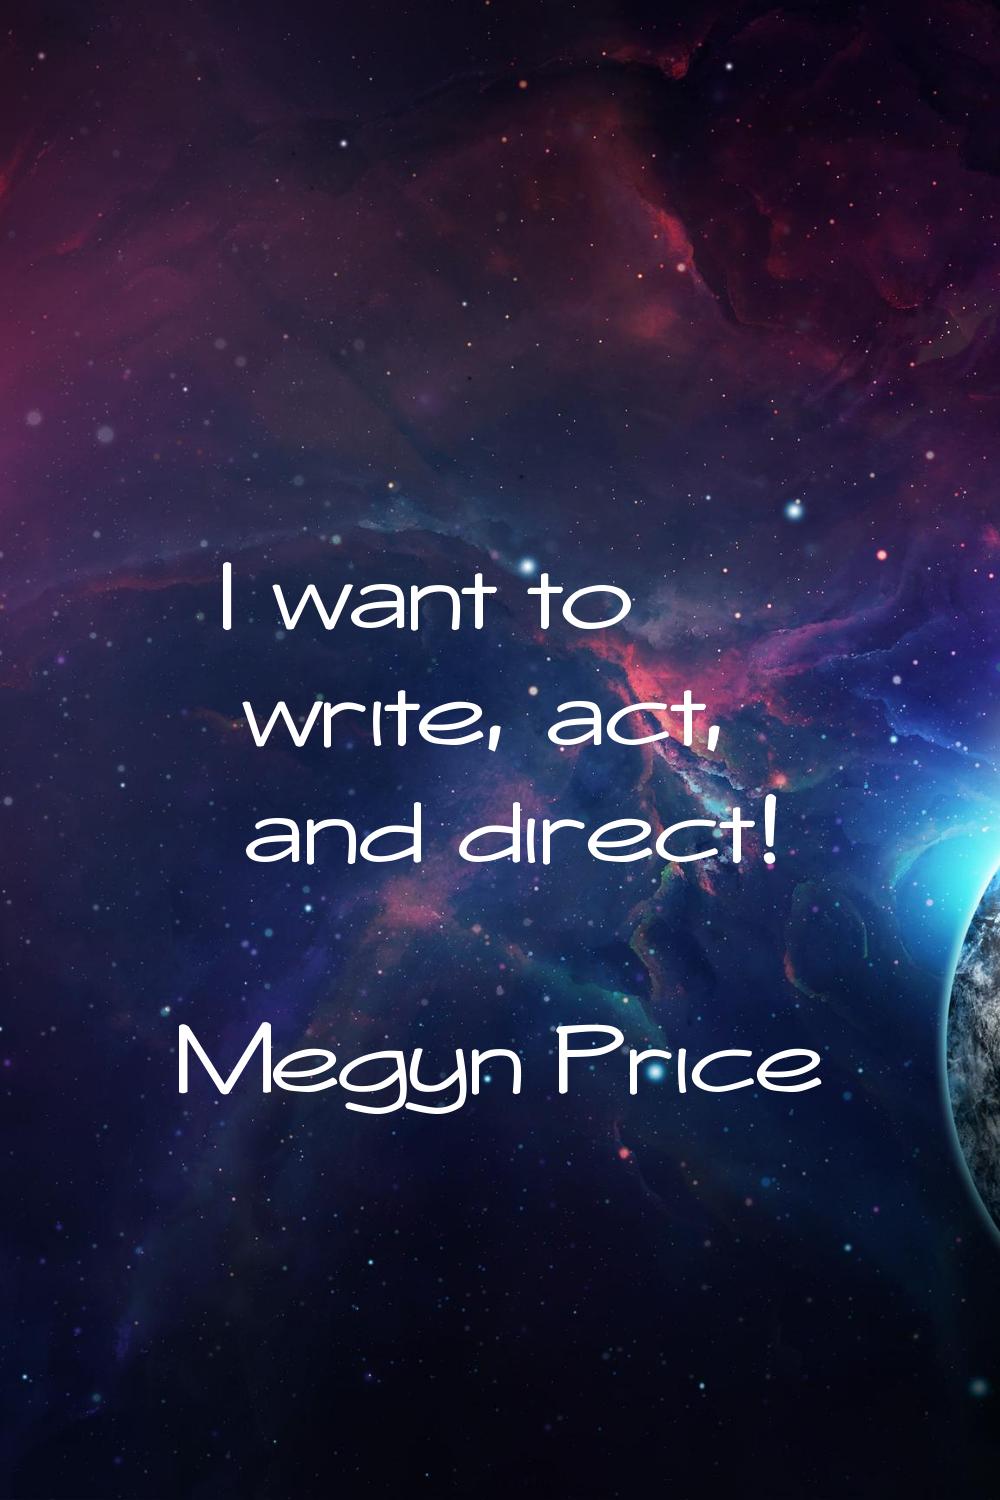 I want to write, act, and direct!